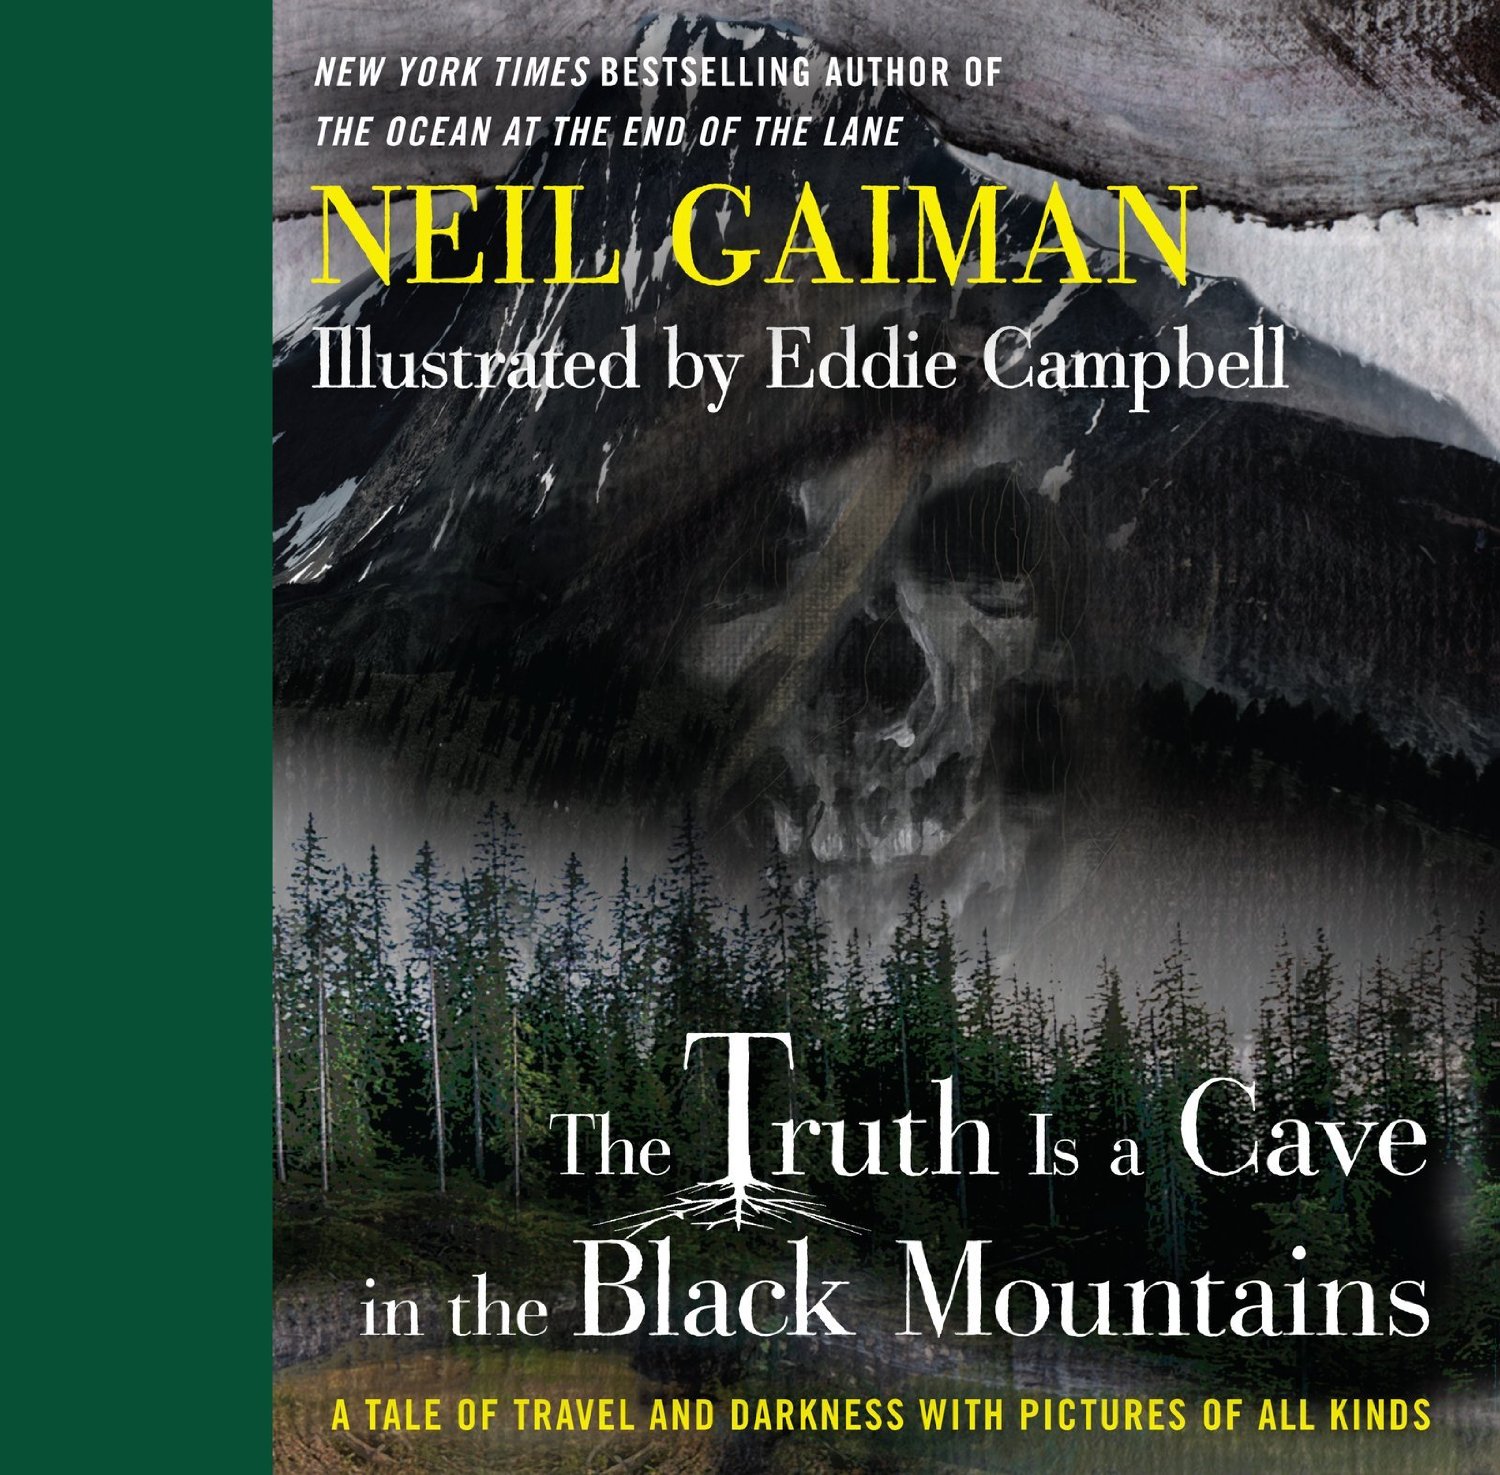 The Truth Is a Cave in the Black Mountains by Neil Gaiman